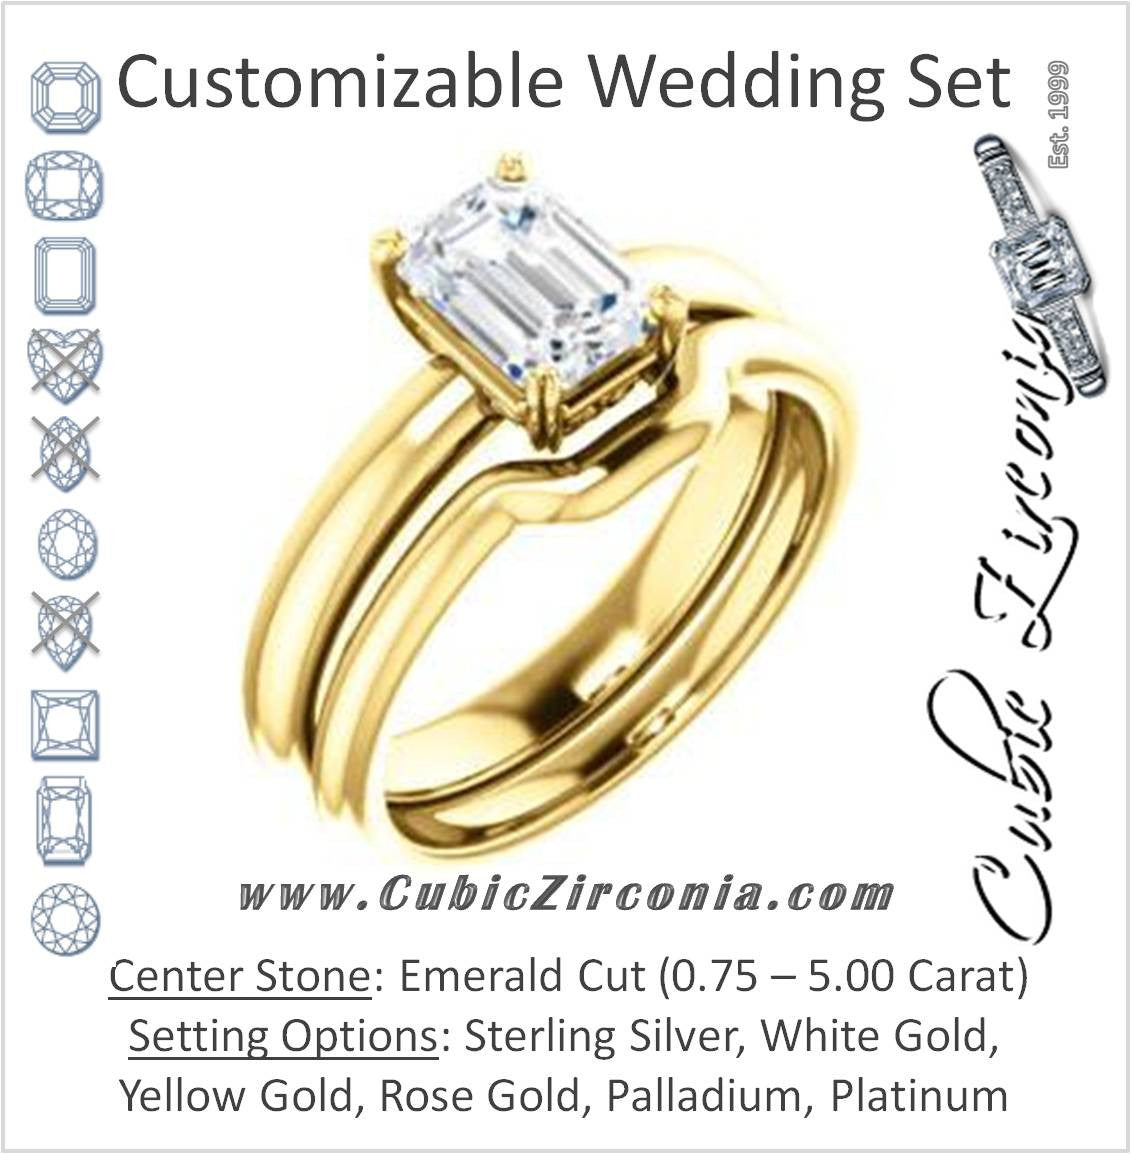 CZ Wedding Set, featuring The Marie Rosalind engagement ring (Customizable Emerald Cut Solitaire with Tooled Trellis Design)